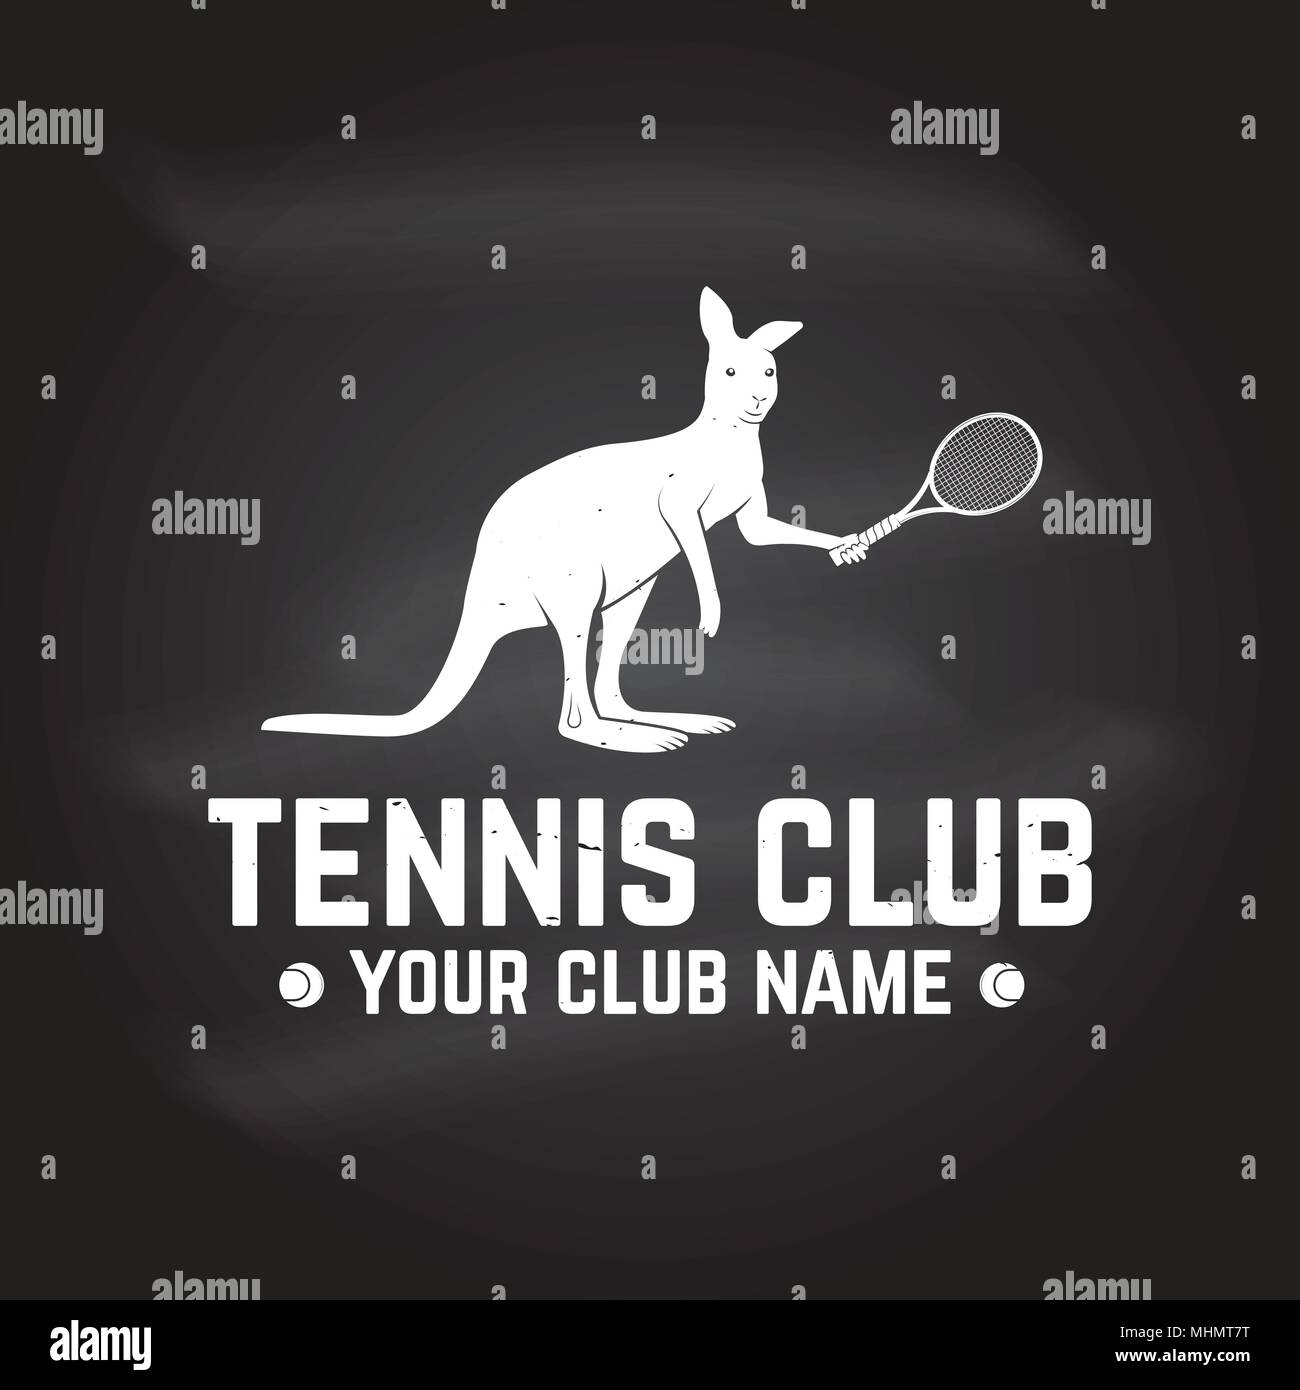 Tennis Club on the chalkboard. Vector illustration. Concept for shirt, print, stamp or tee. Vintage typography design with tennis racket and kangaroo  Stock Vector